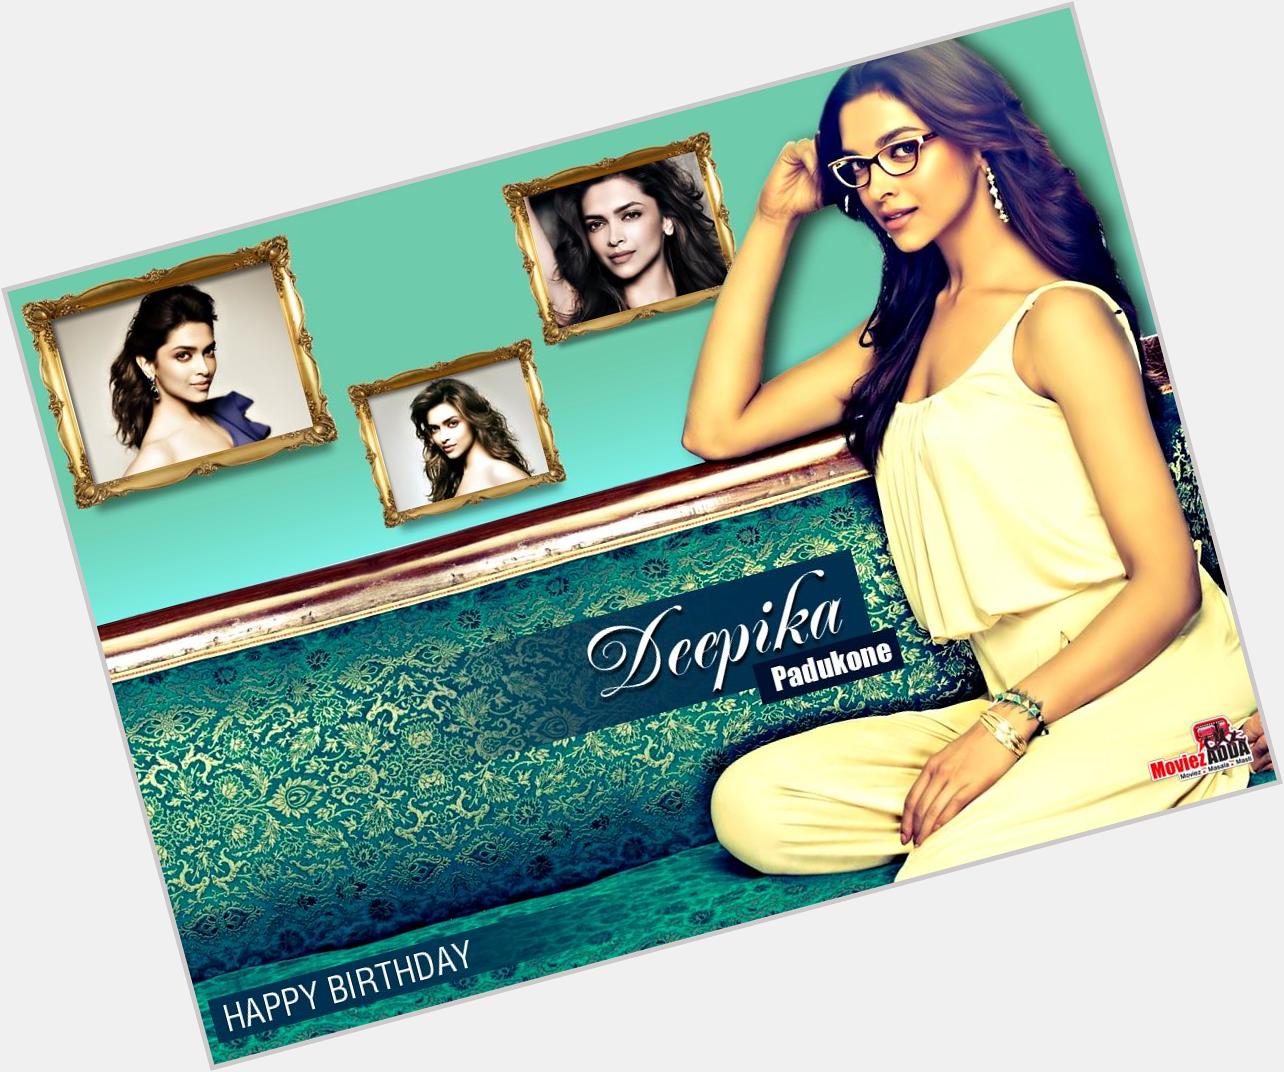  We Wish Deepika Padukone a Very Happy Bday!

Retwet To Wish her | Follow US For More Bollywood News. 